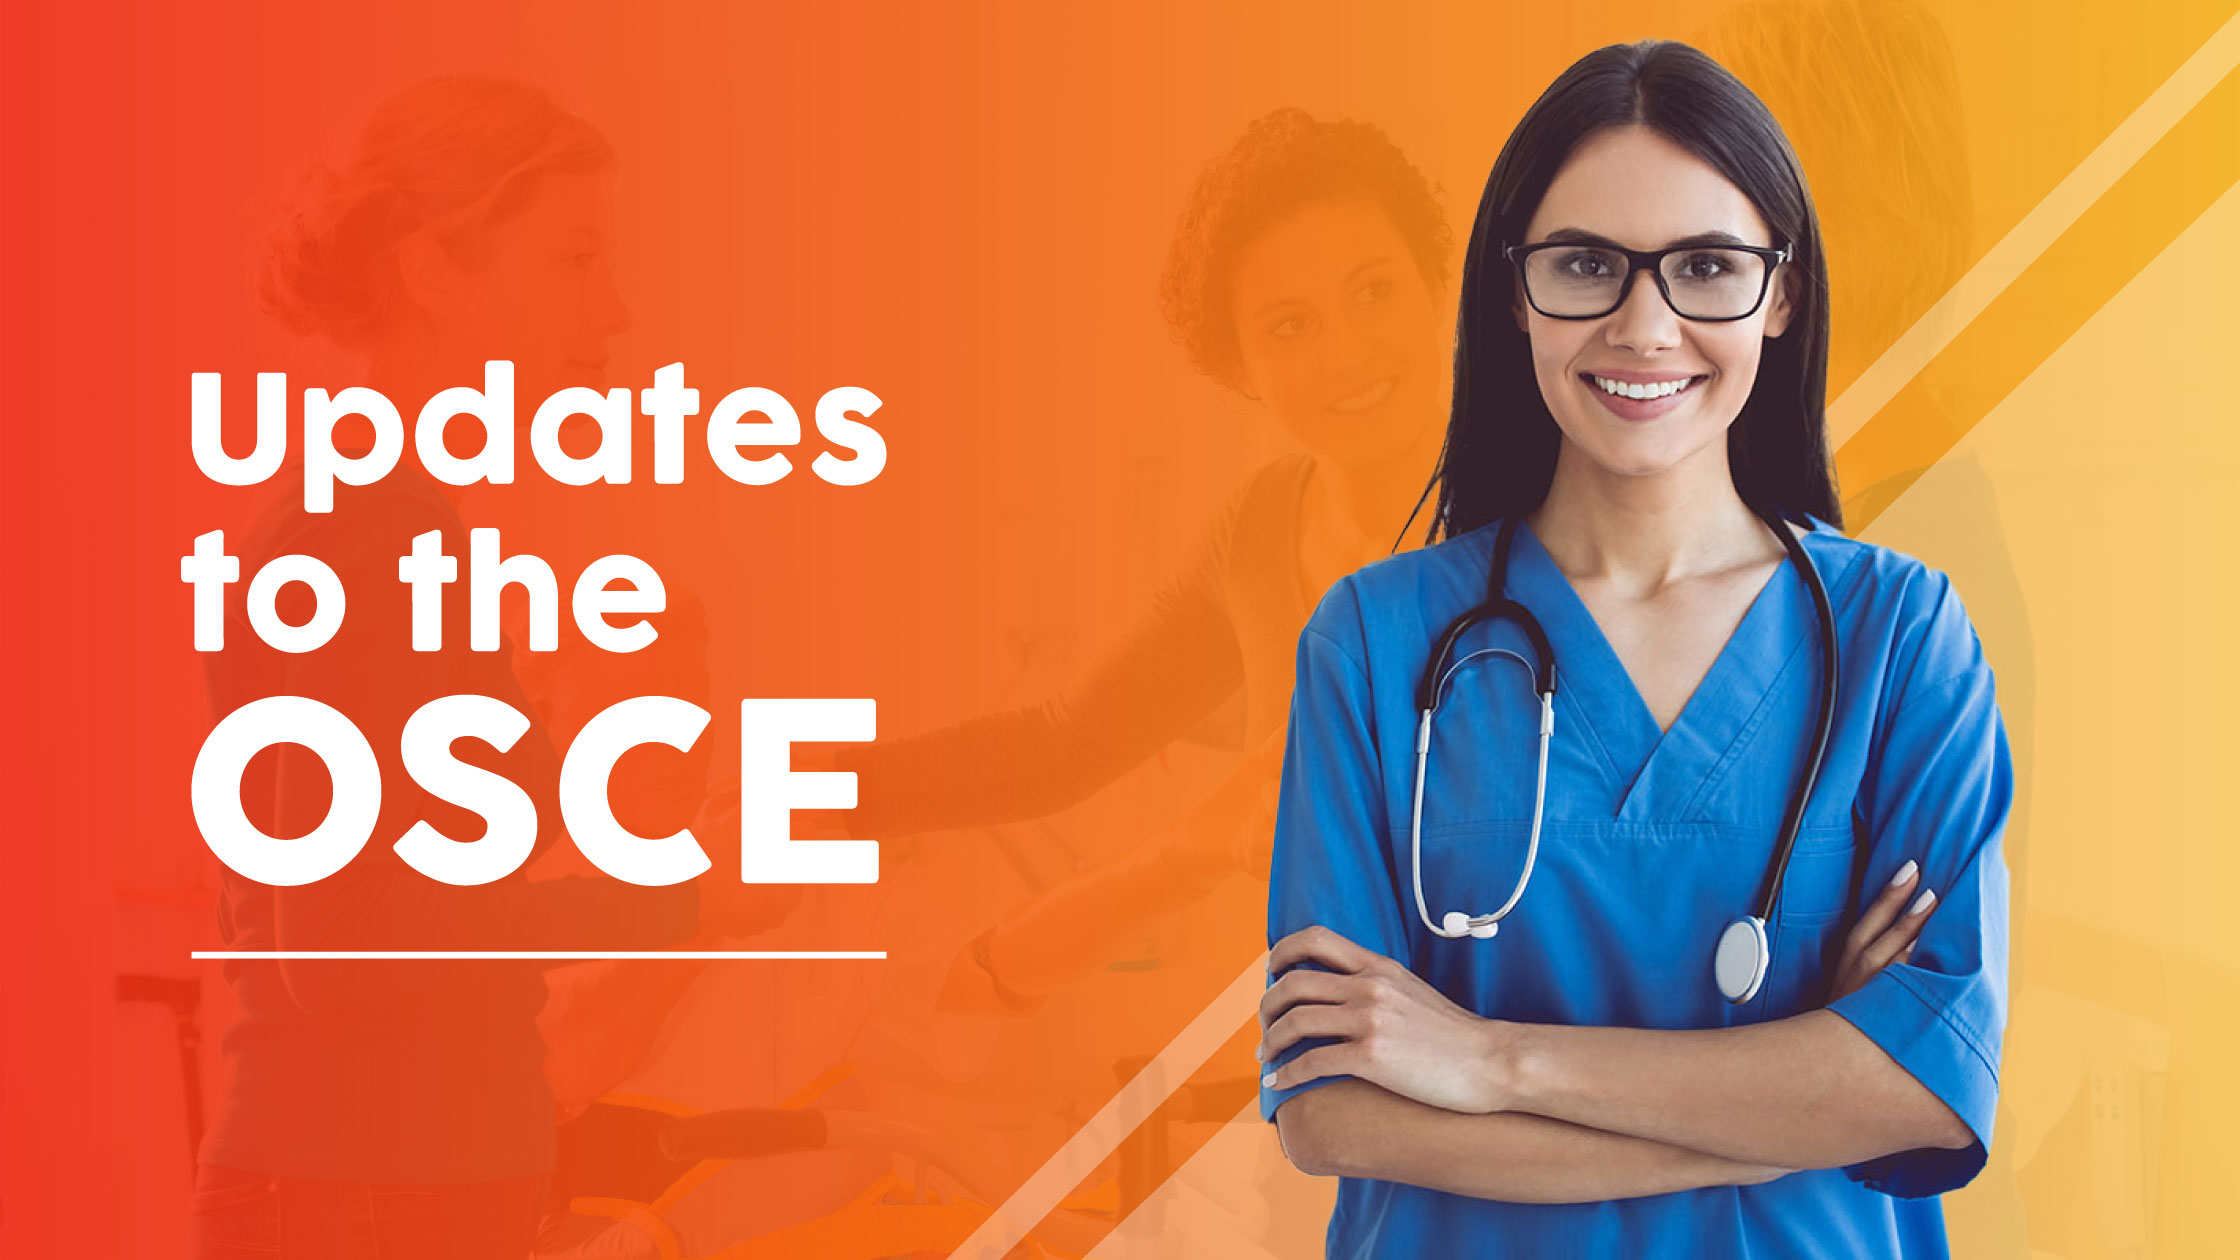 Updates to the OSCE – Test of Competency for Nurses and Midwives in UK